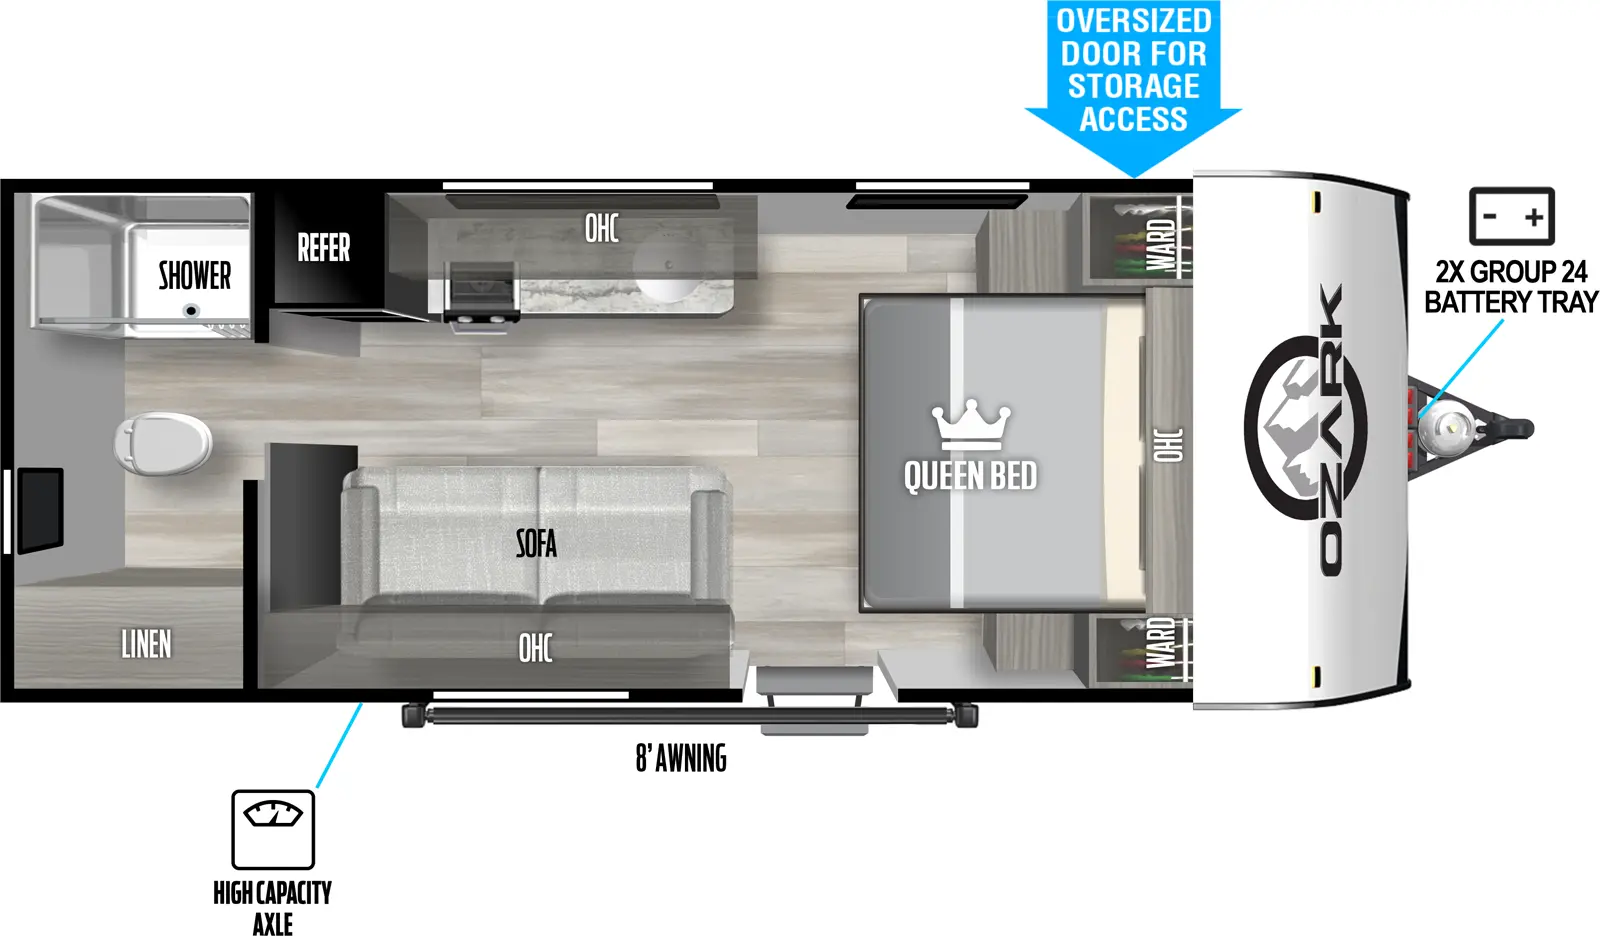 The 1610RBLE has zero slideouts and one entry. Exterior features 2X group 24 battery tray, oversized door for storage access, high capacity axle, and 8 foot awning. Interior layout front to back: queen bed with overhead cabinet and wardrobes on each side; off-door side kitchen counter with sink, overhead cabinet, cooktop, and standard refrigerator; door side entry, and sofa seating with overhead cabinet rear bathroom with toilet, shower and linen closet only.